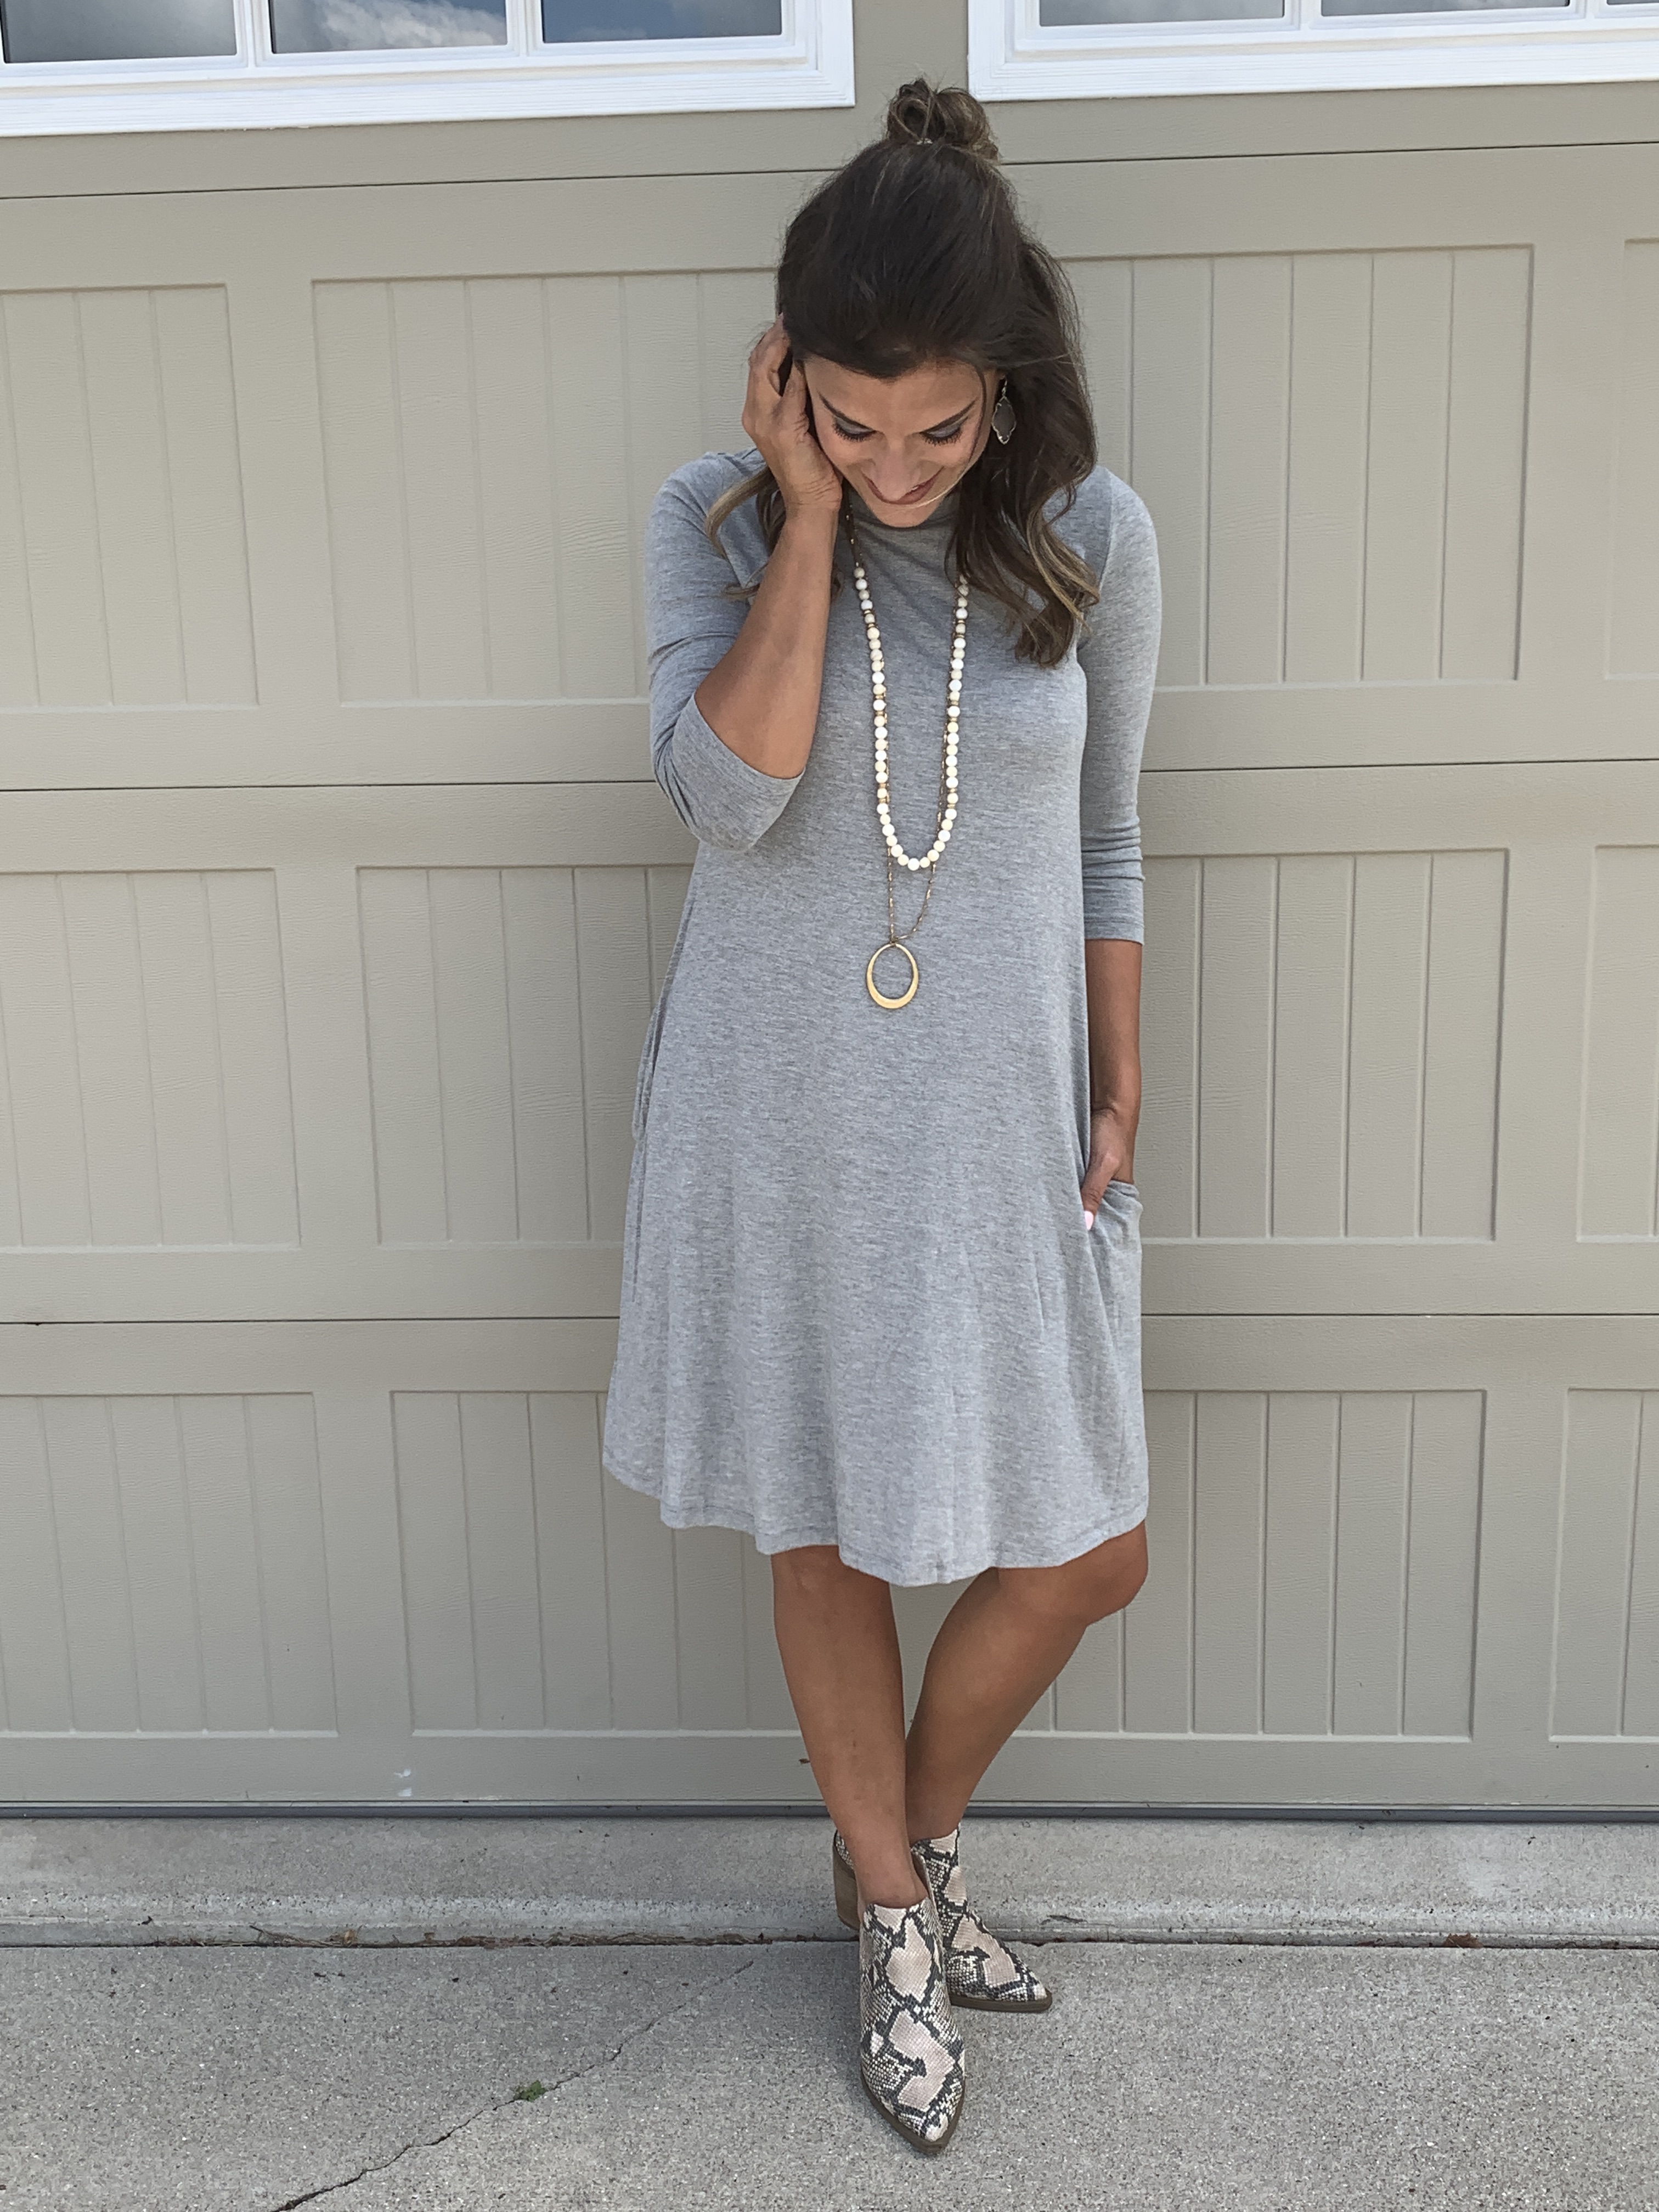 How to Wear One Grey Dress 10 Ways – Just Posted